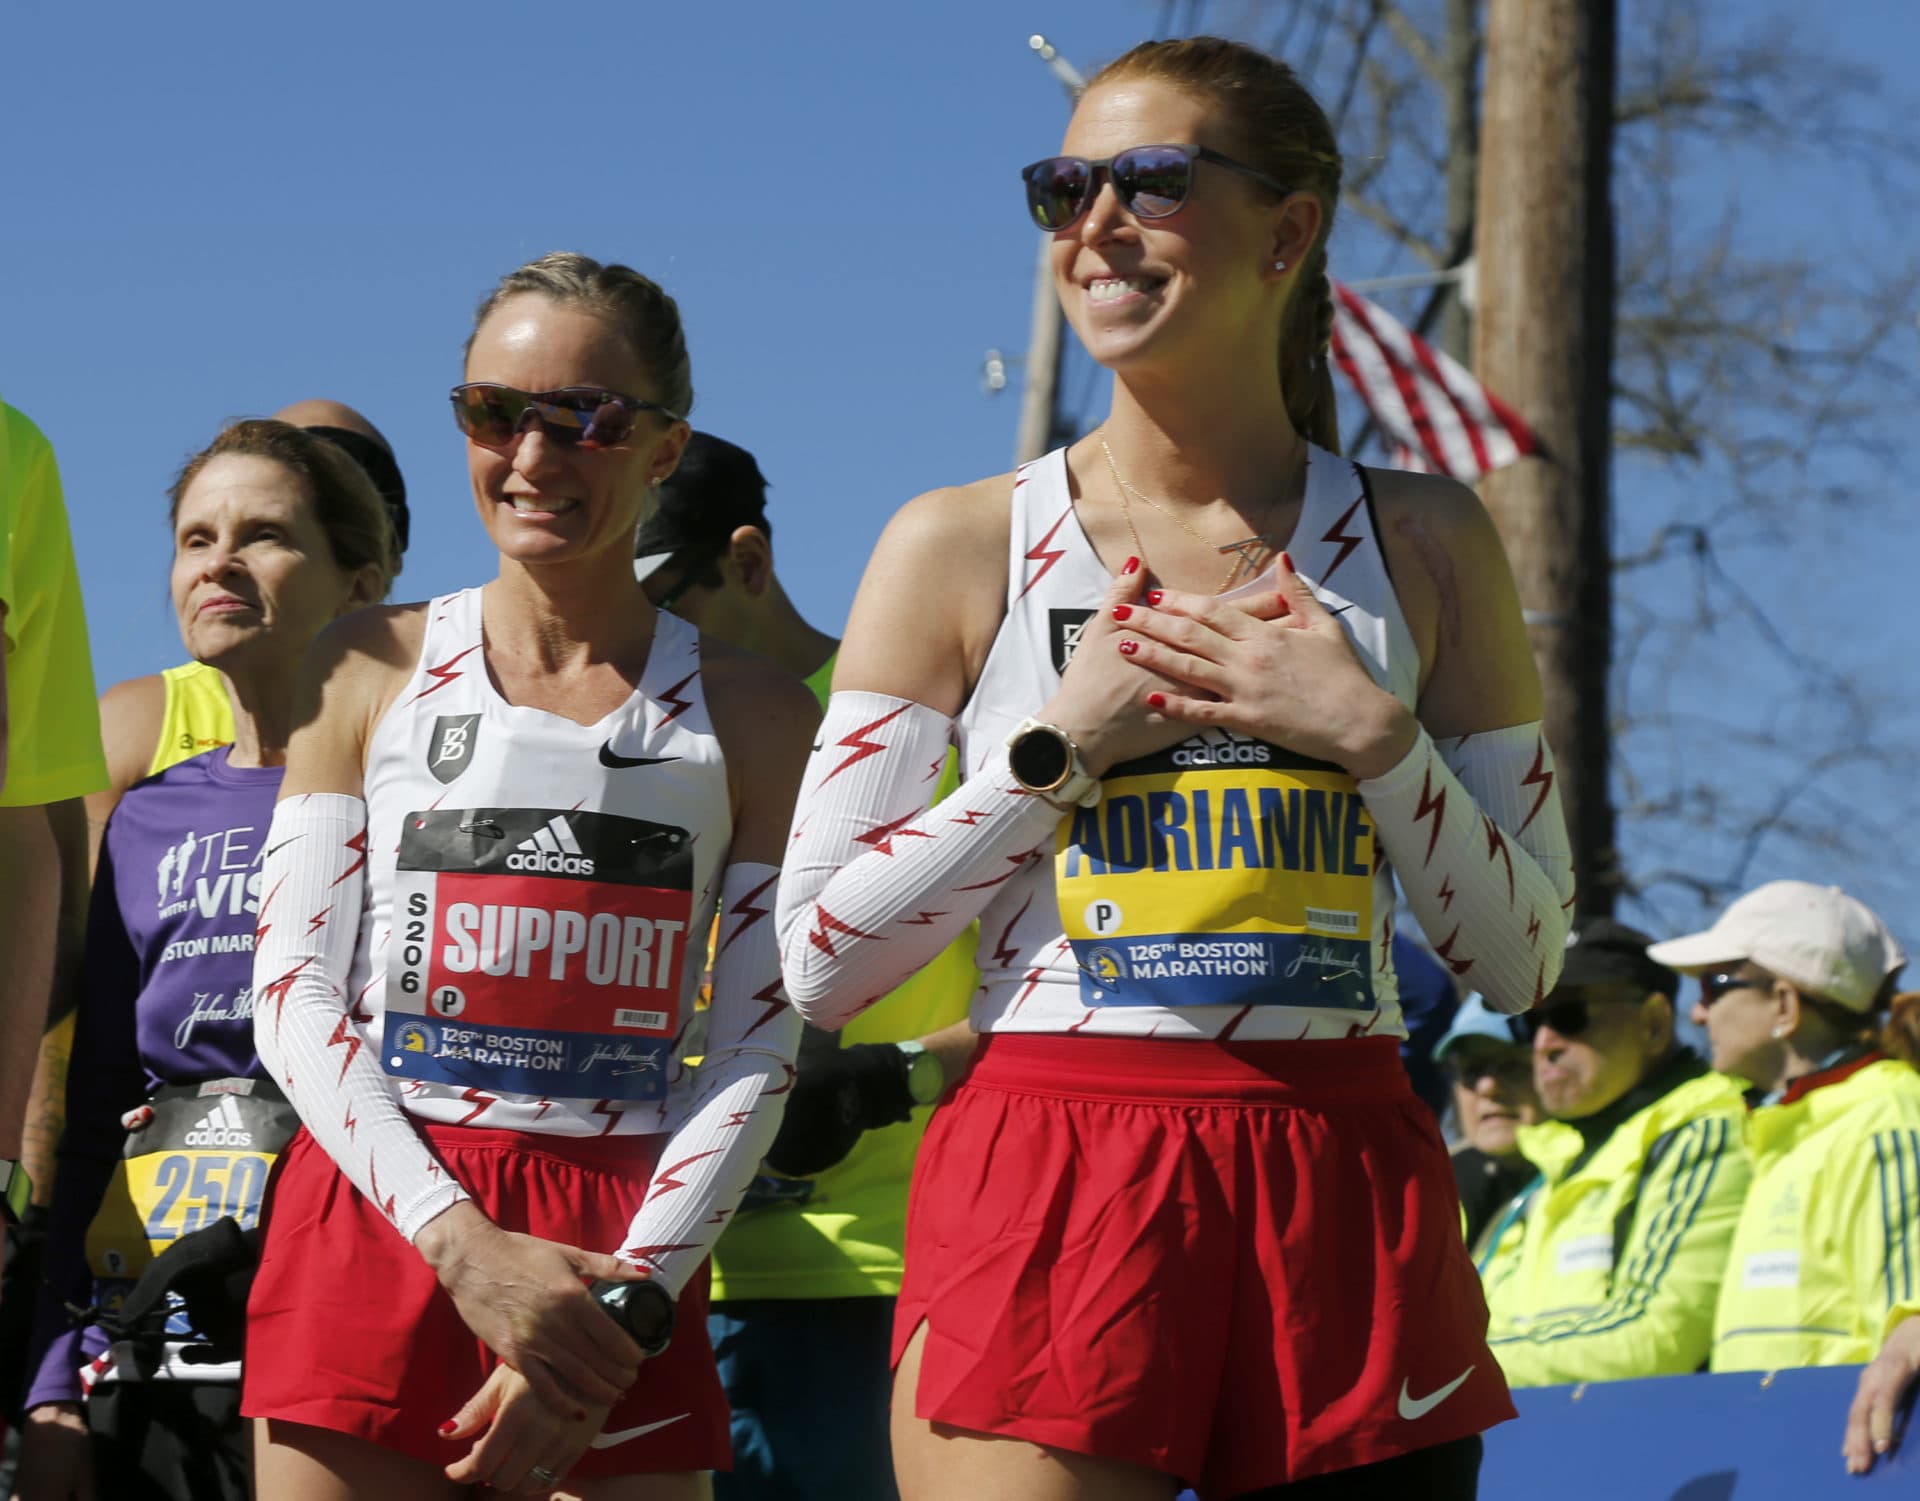 Boston Marathon bombing survivor Adrianne Haslet, right, reacts as she is introduced in the para division with Shalane Flanagan, left, as her support runner at the starting line of the 126th Boston Marathon, Monday, April 18, 2022, in Hopkinton, Mass. (Mary Schwalm/AP)